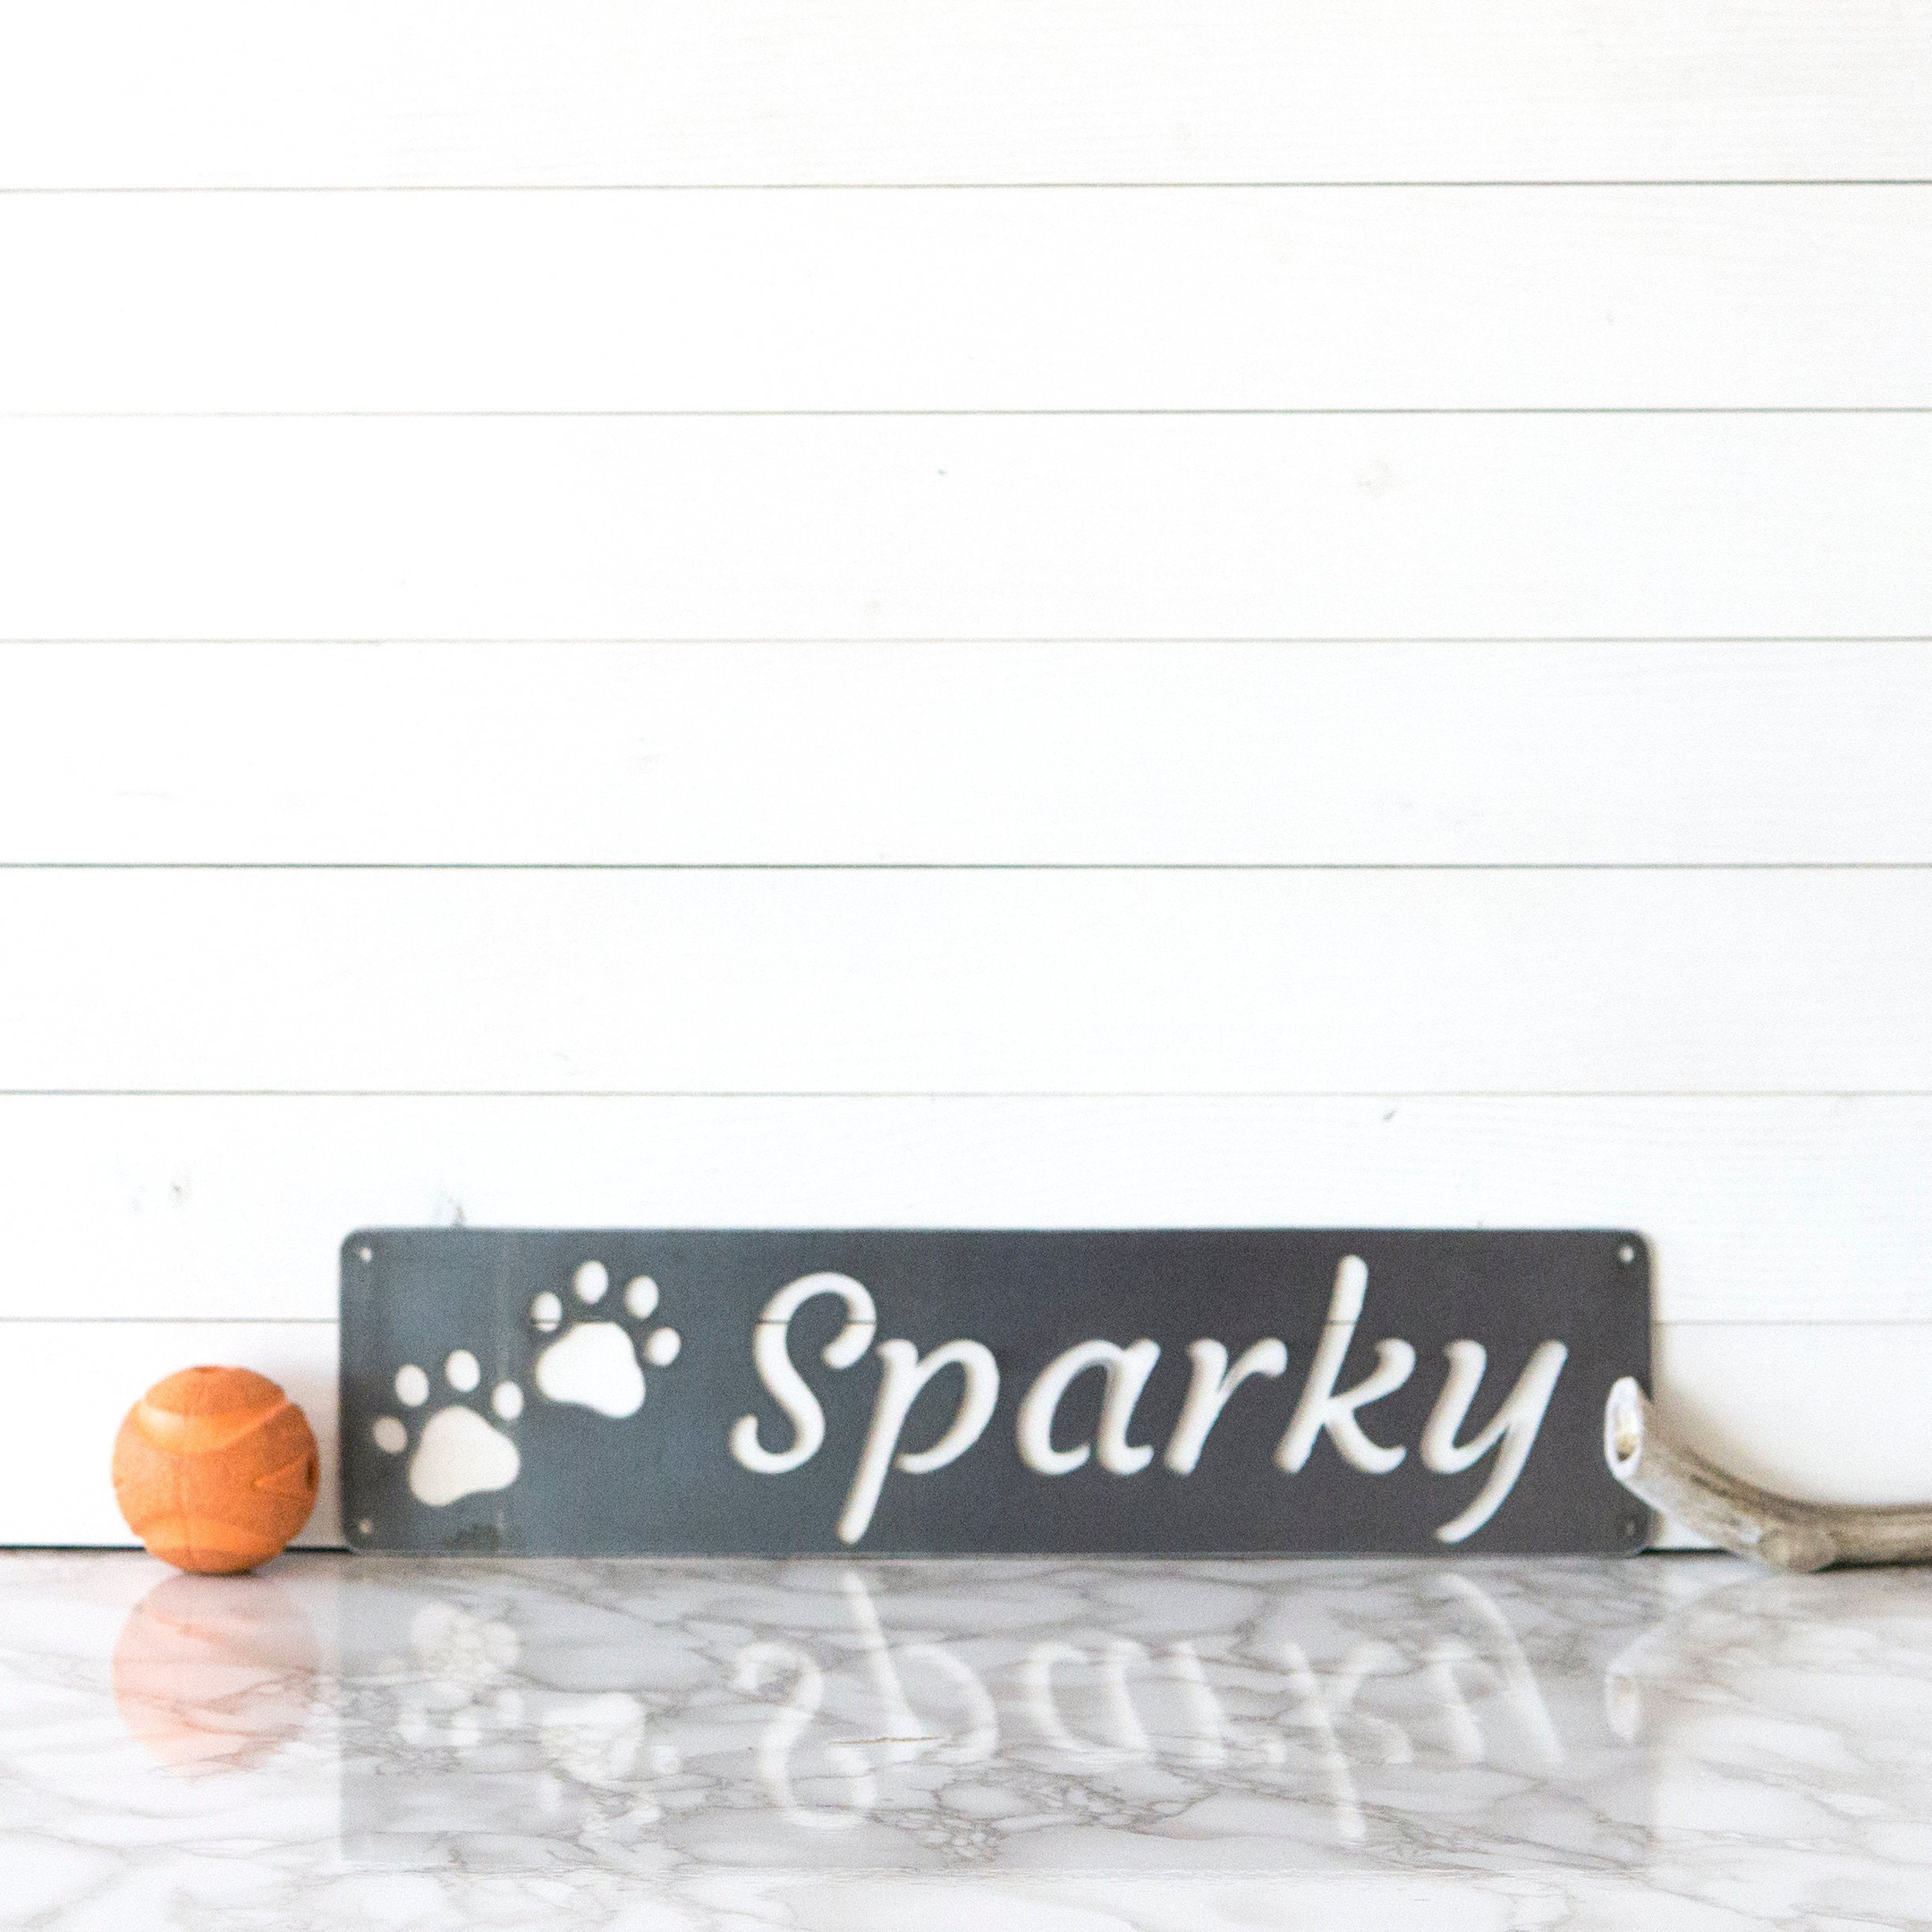 Custom Dog House Sign, Dog Sign, Personalized Dog Sign, Metal Dog Sign, Gifts For Dog Owners, Gifts For Dog Lovers, Custom Dog Gifts, Laser Cut Metal Signs Custom Gift Ideas 12x12IN